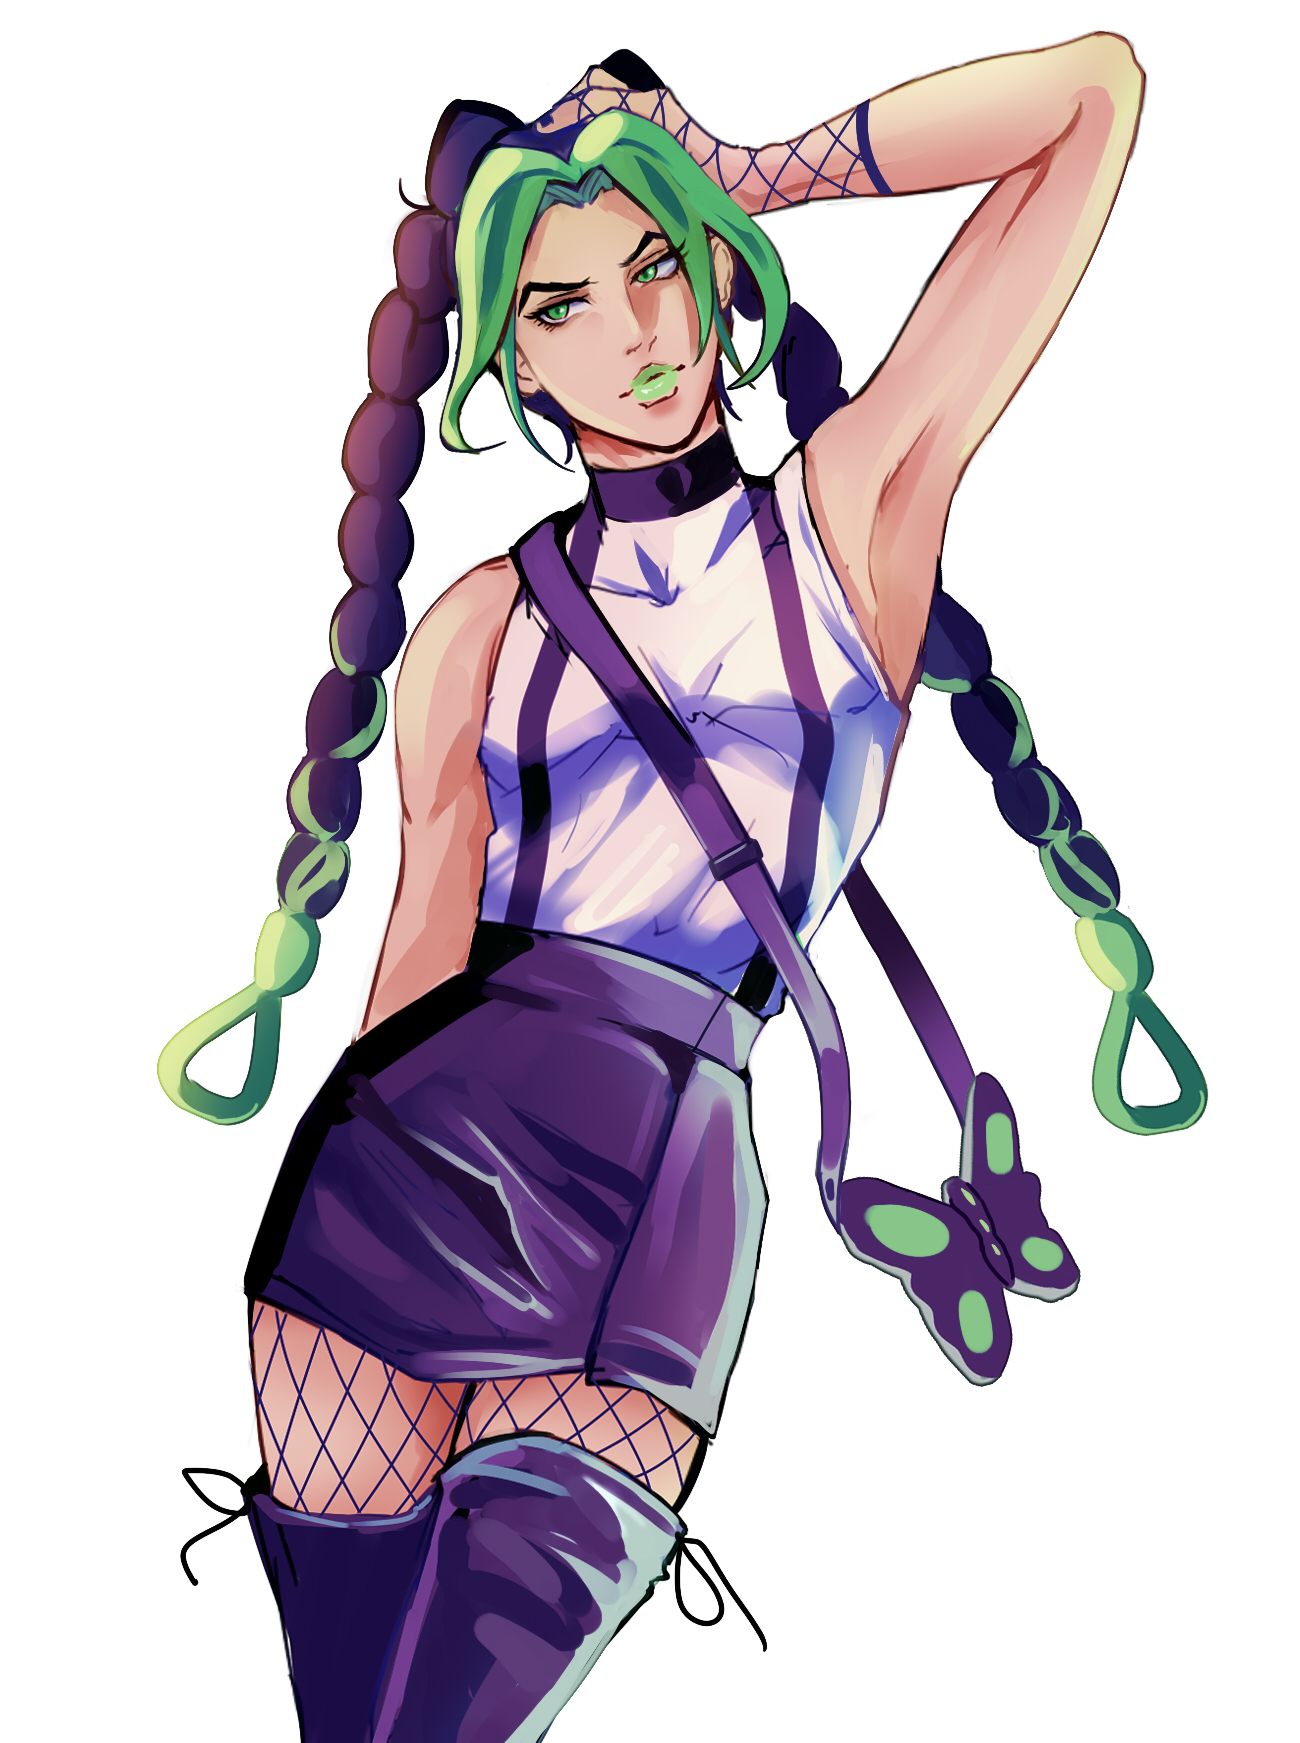 “doodle painted jolyne to take a break” .